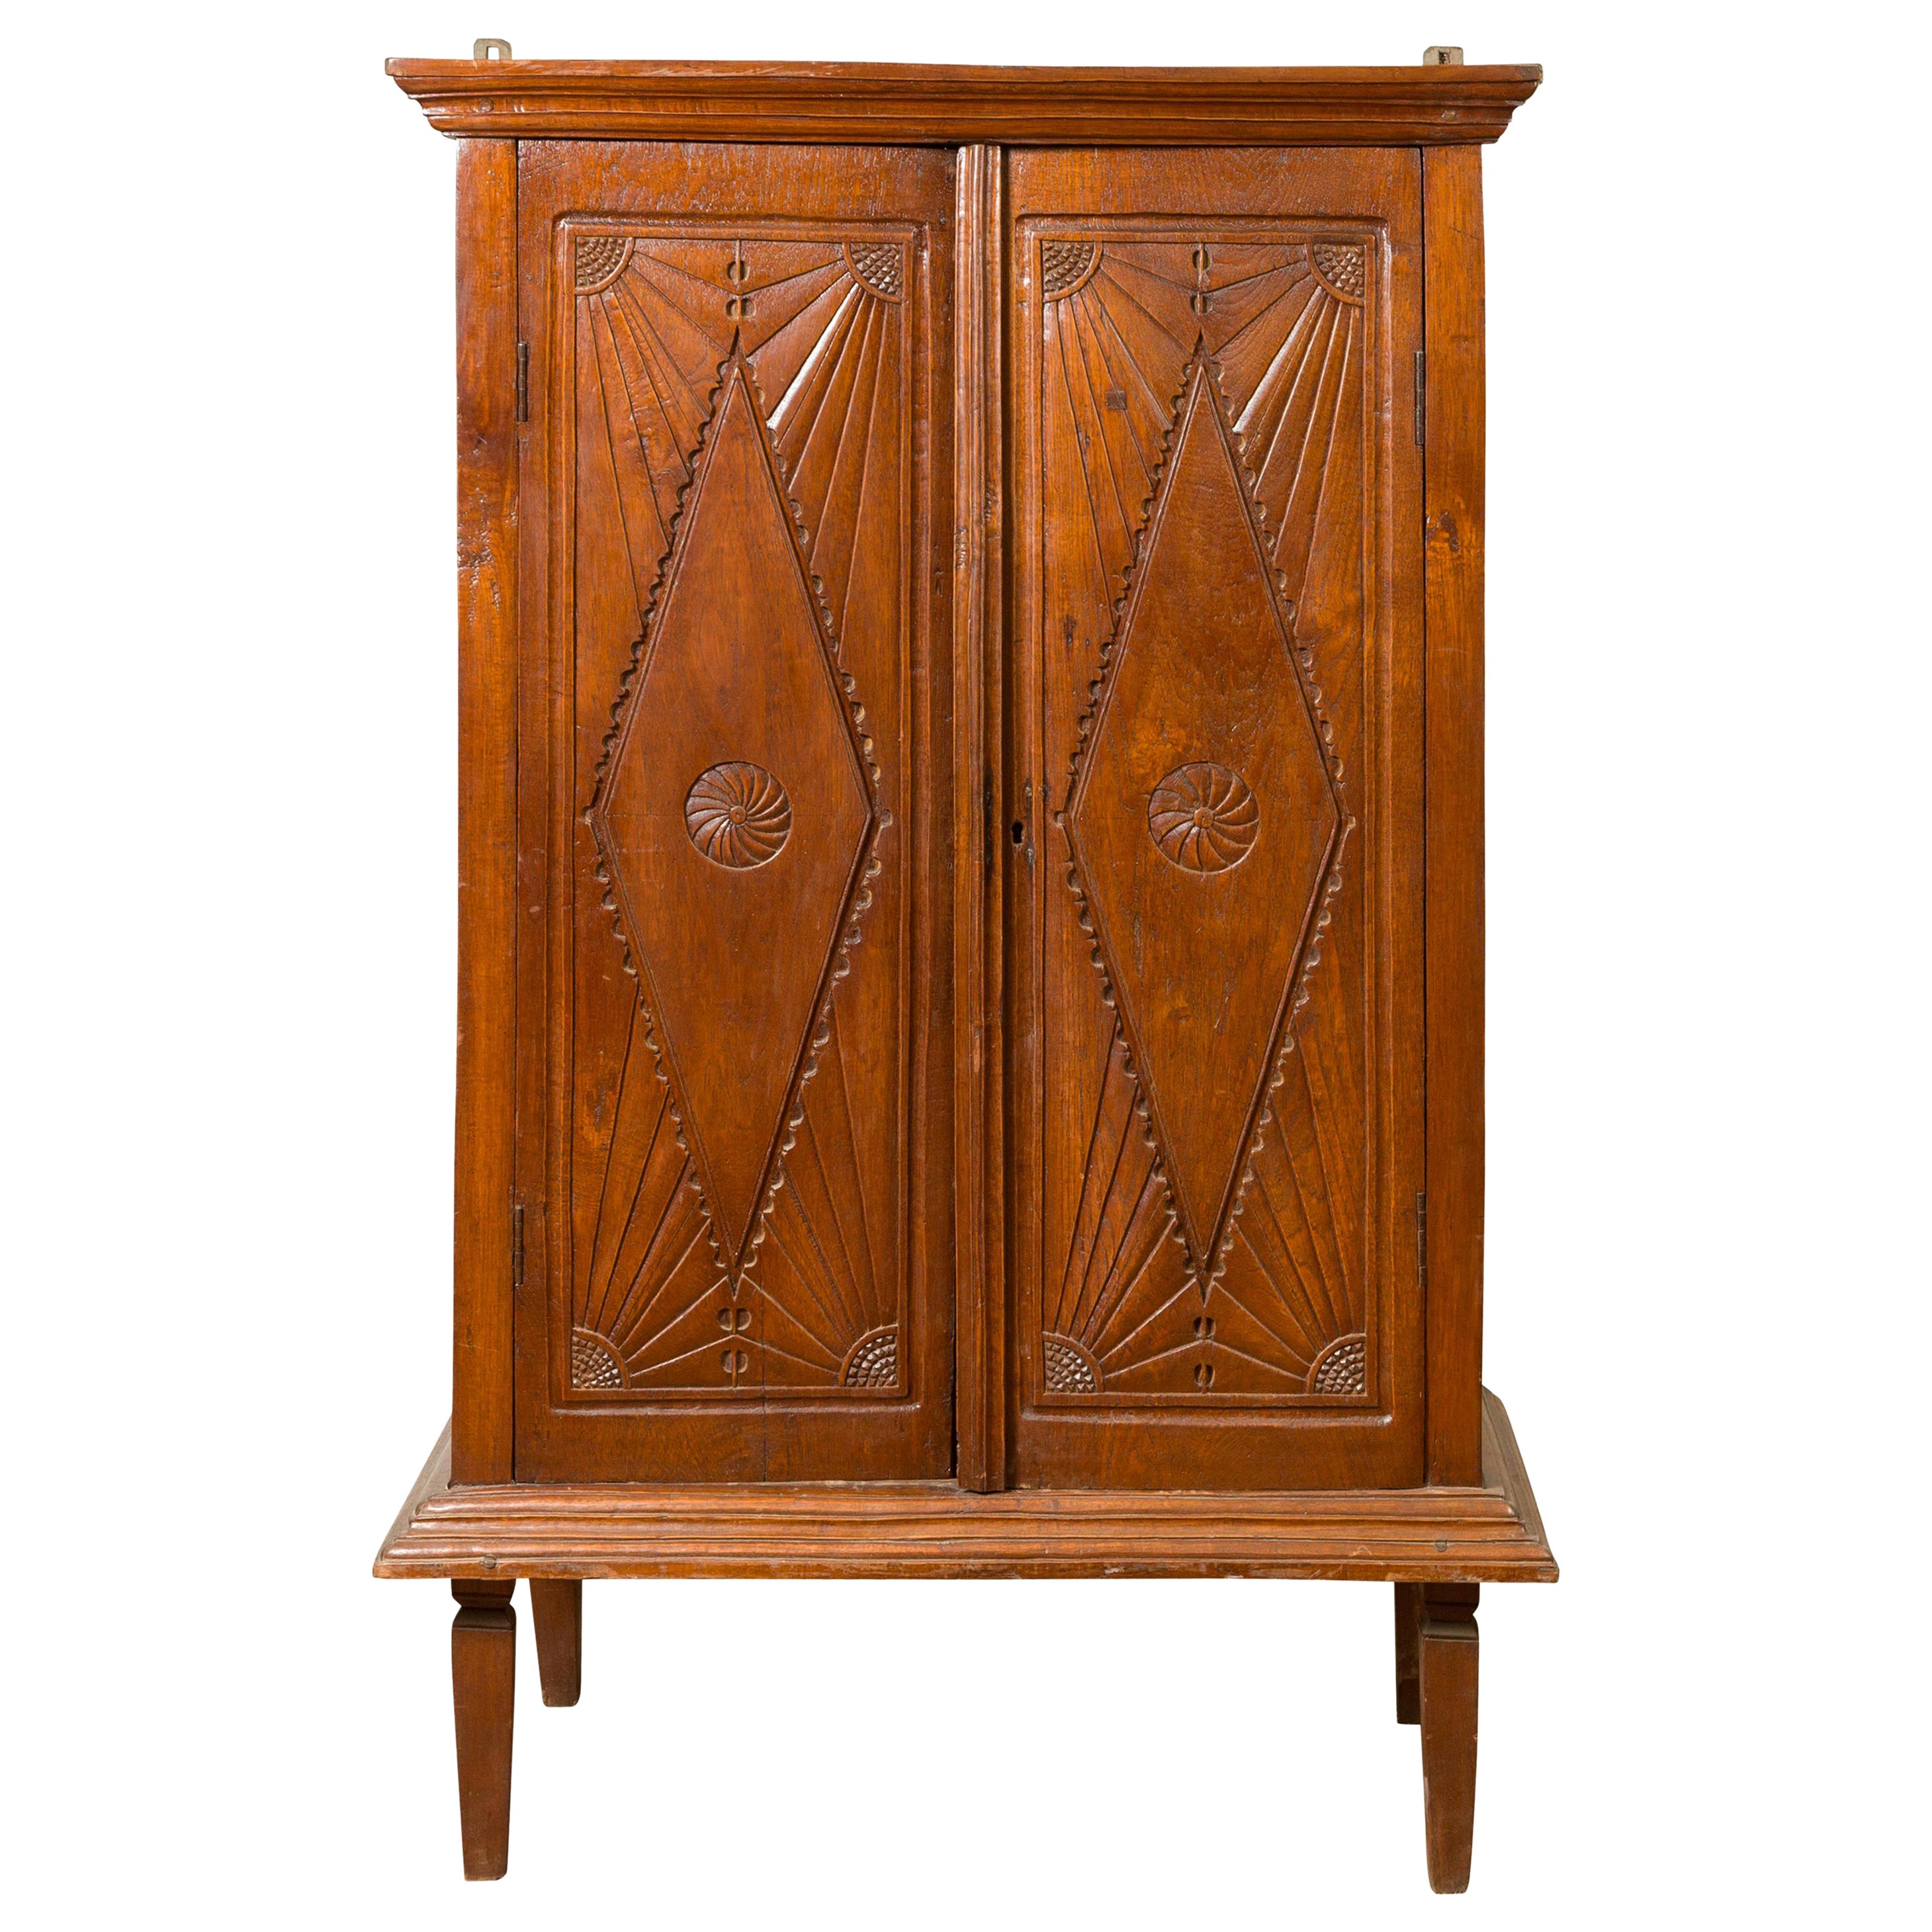 Dutch Colonial Carved Wooden Cabinet with Diamonds and Radiating Motifs For Sale